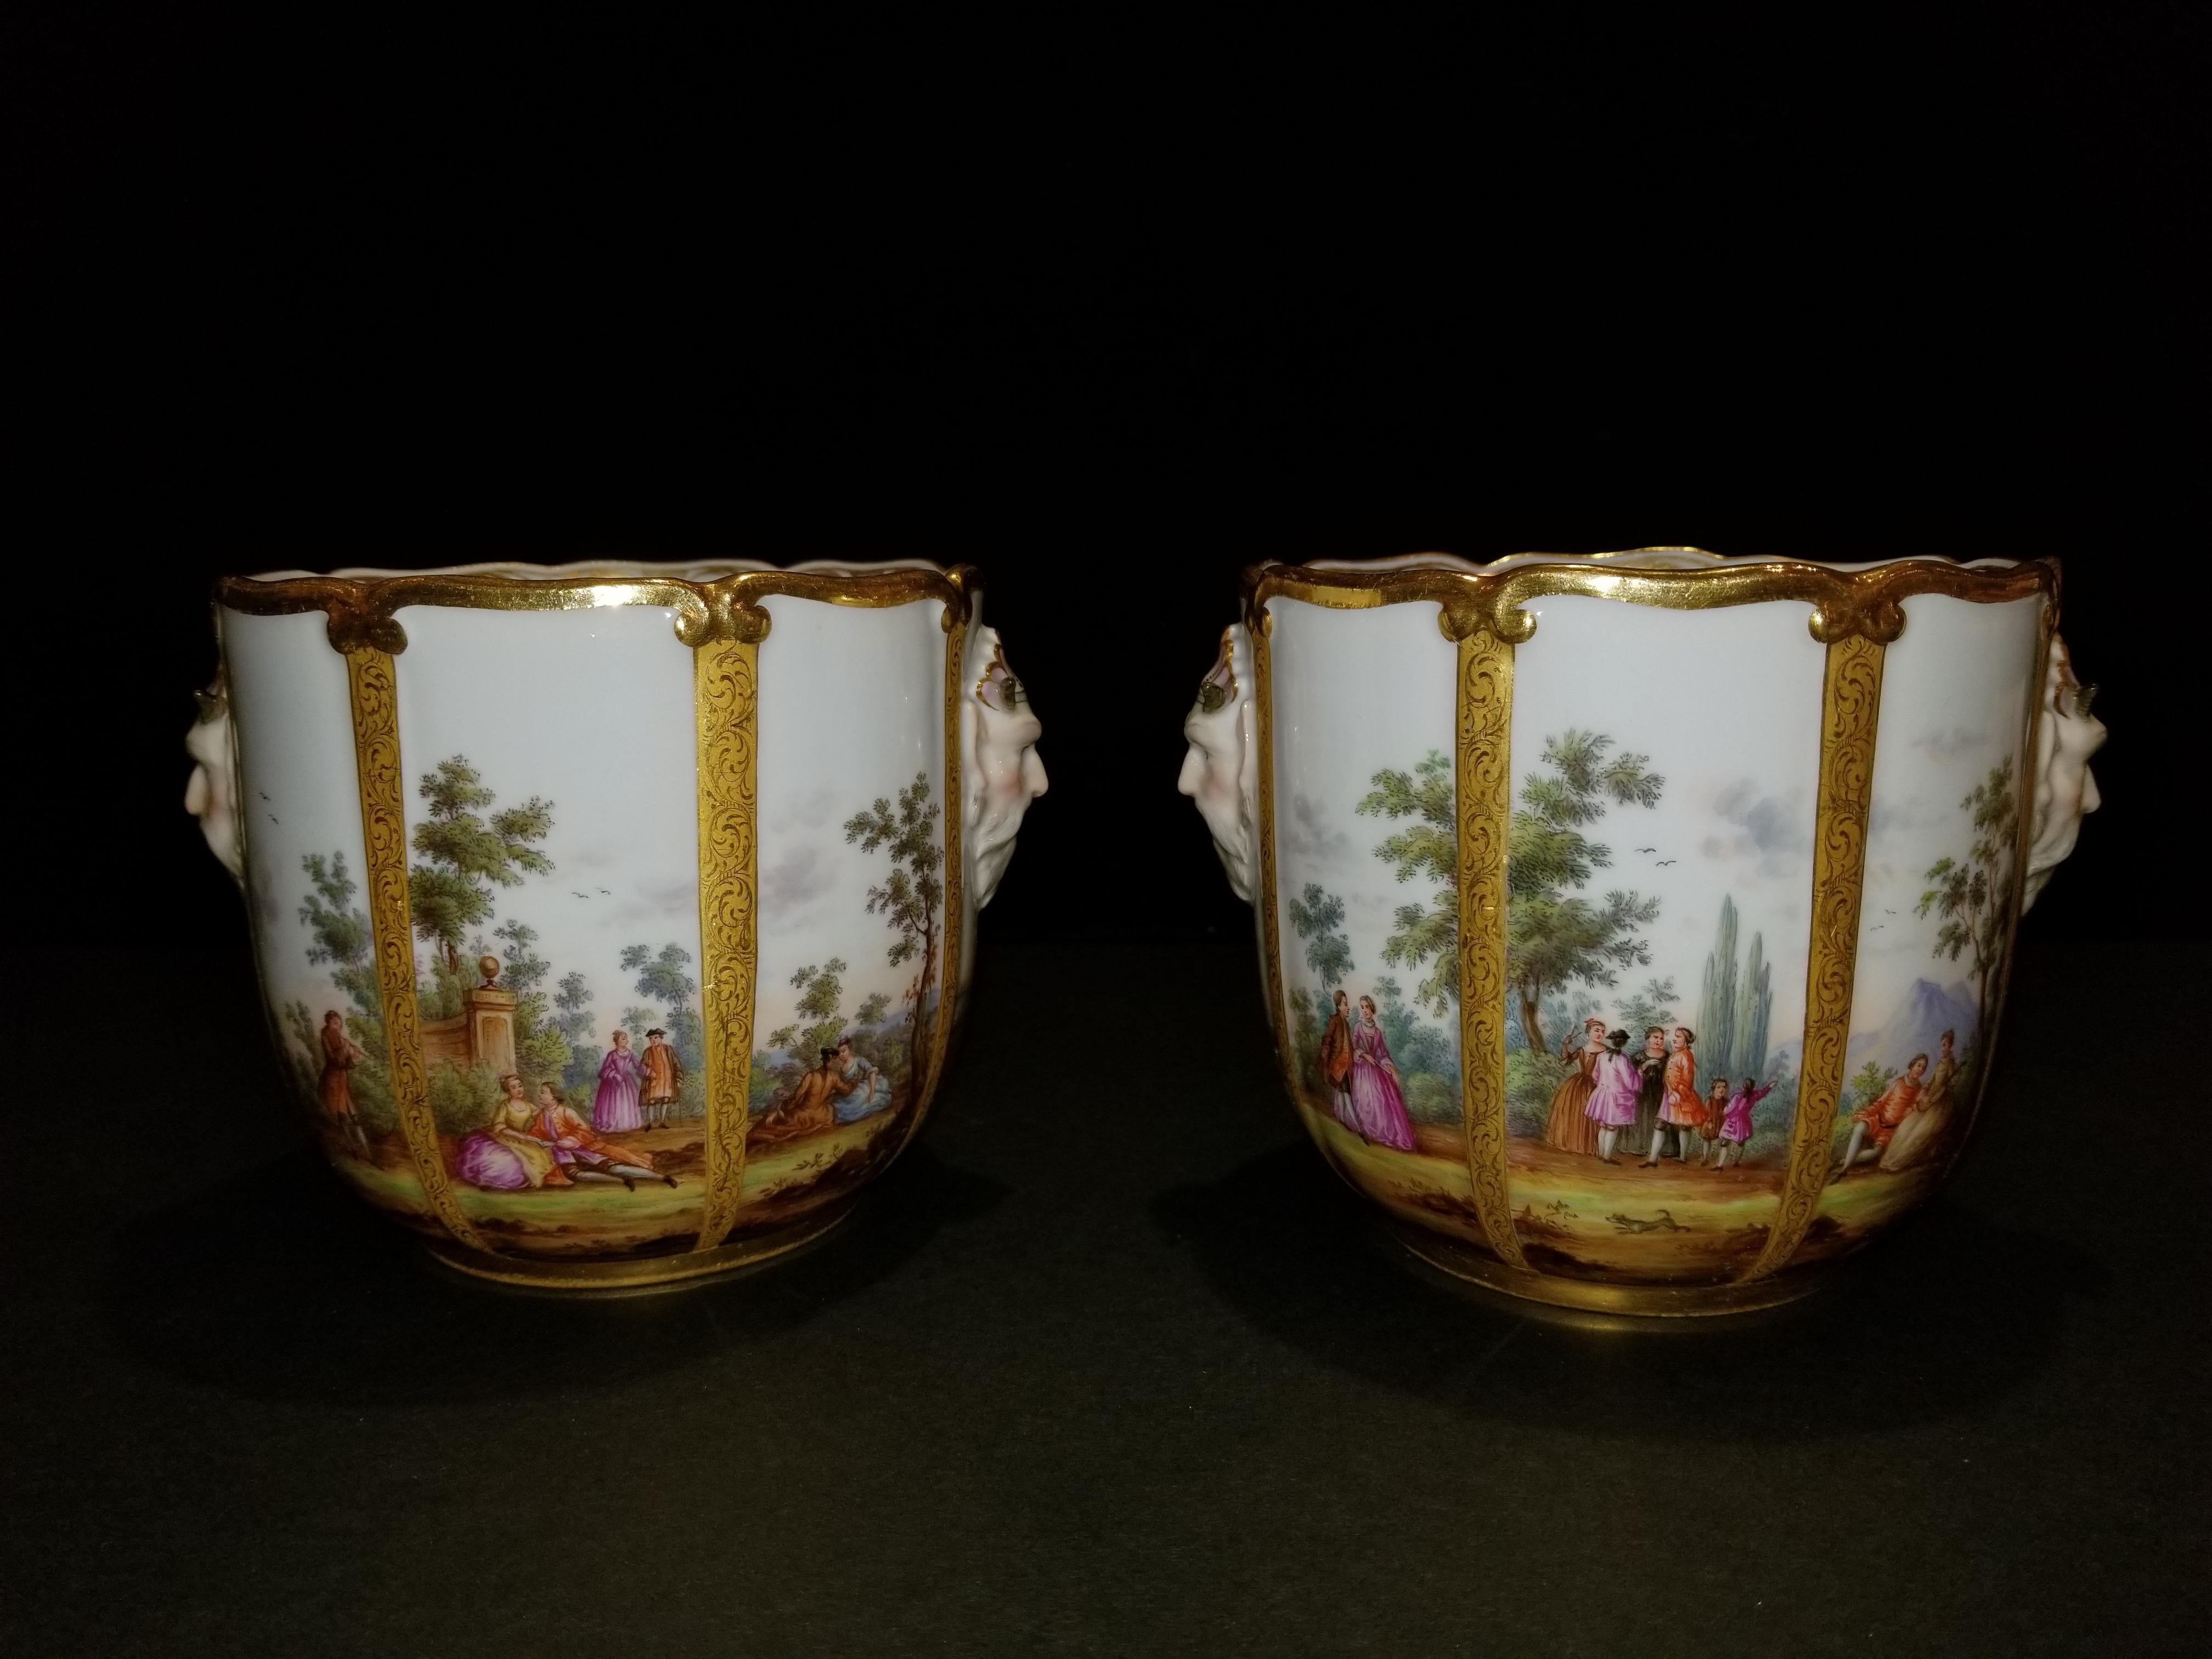 A fabulous pair of Meissen Porcelain glass coolers/cachepots. This exceptional pair of exquisitely hand-painted Meissen Porcelain glass coolers are each painted with panels of figures in a landscape, which include harbor as well as equestrian